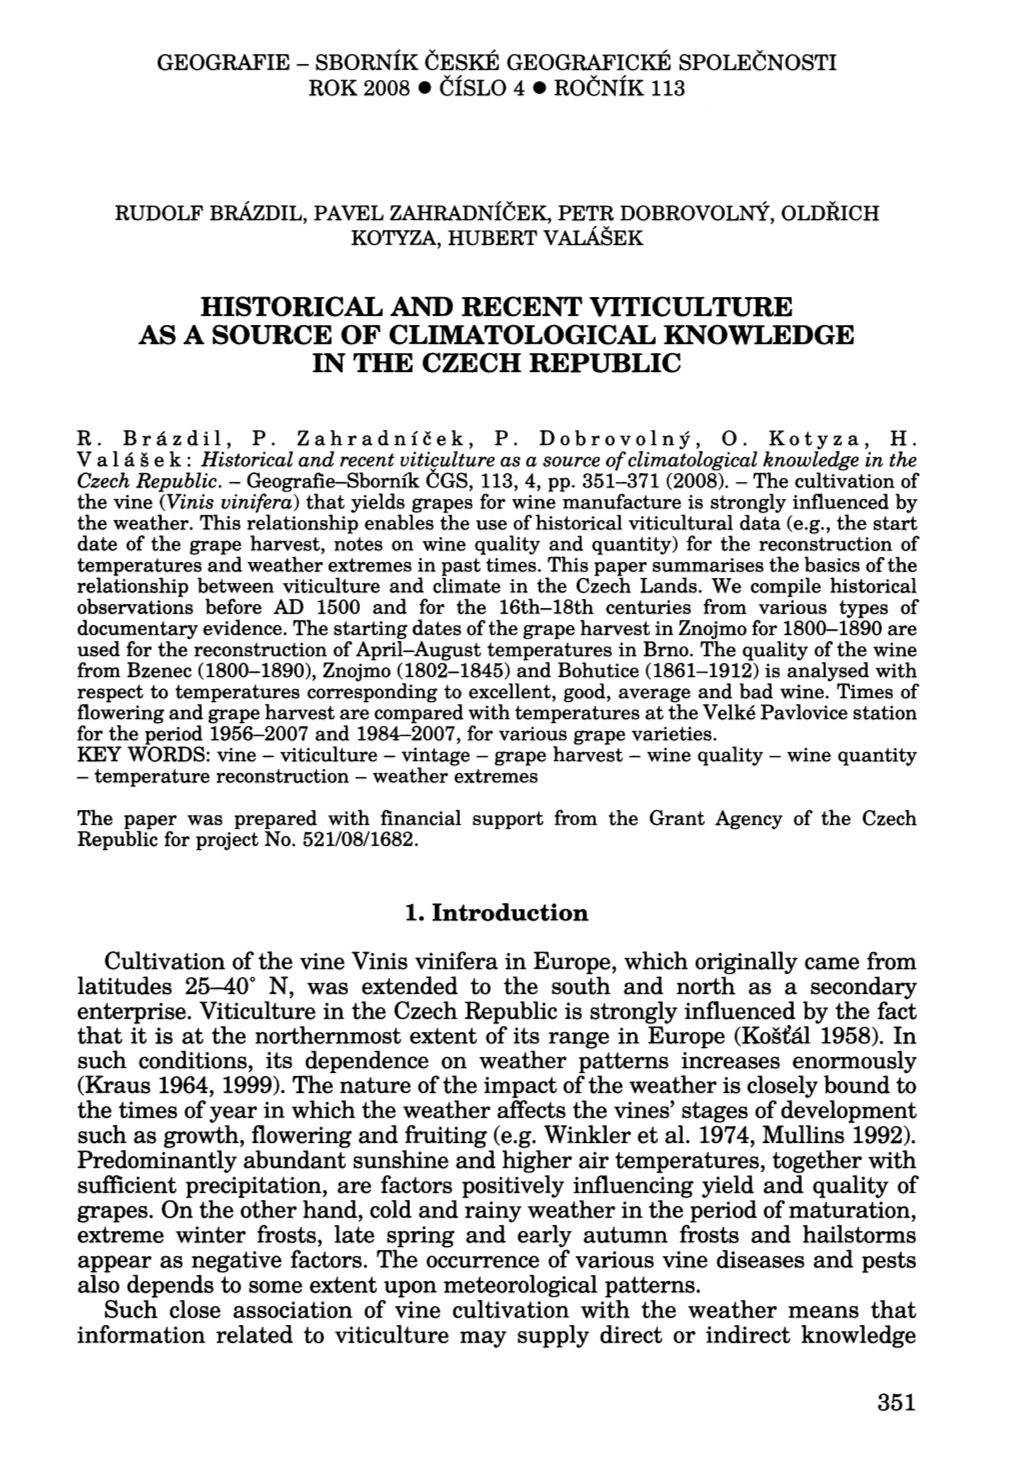 Historical and Recent Viticulture As a Source of Climatological Knowledge in the Czech Republic